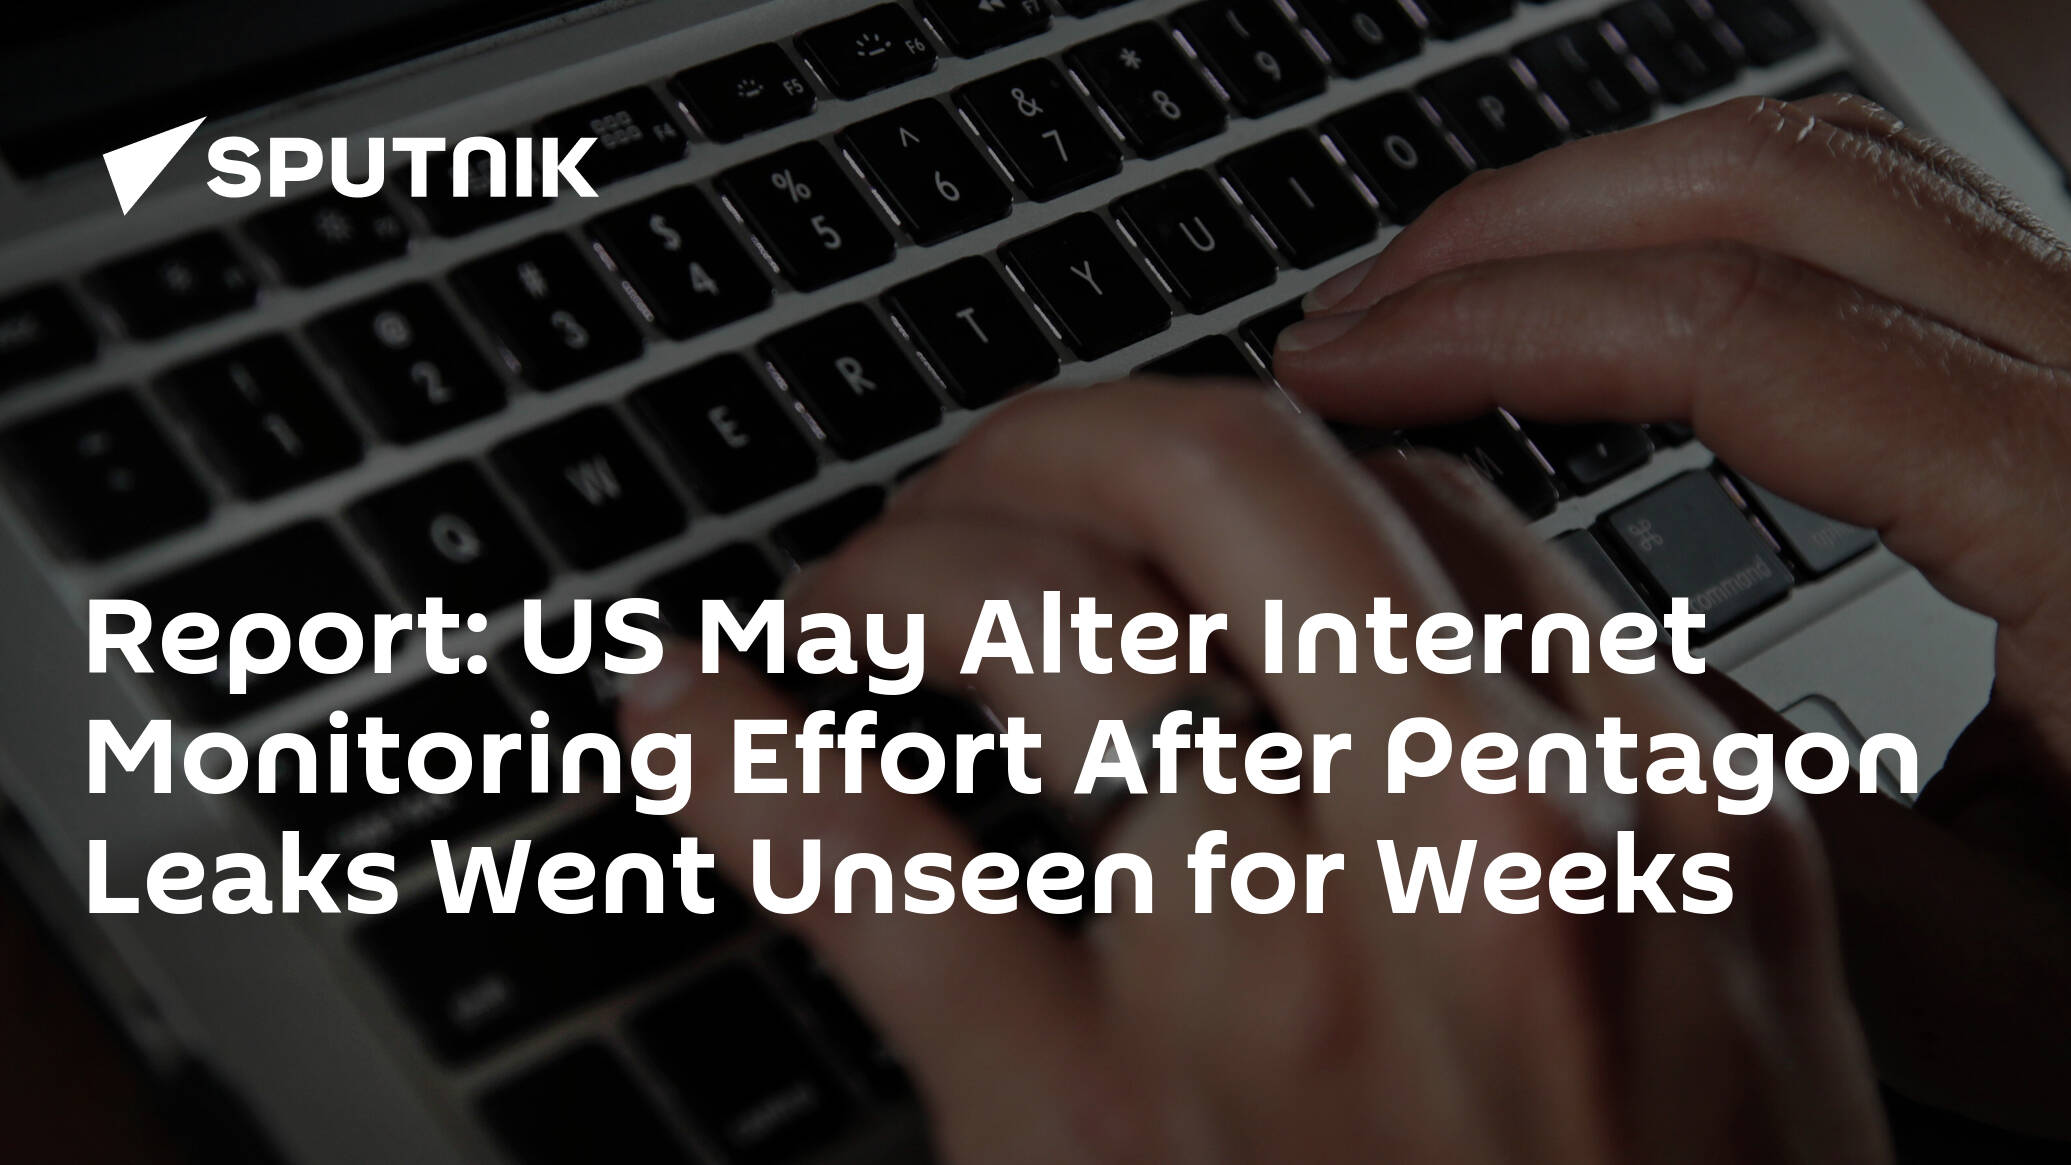 Report: US May Alter Internet Monitoring Effort After Pentagon Leaks Went Unseen for Weeks